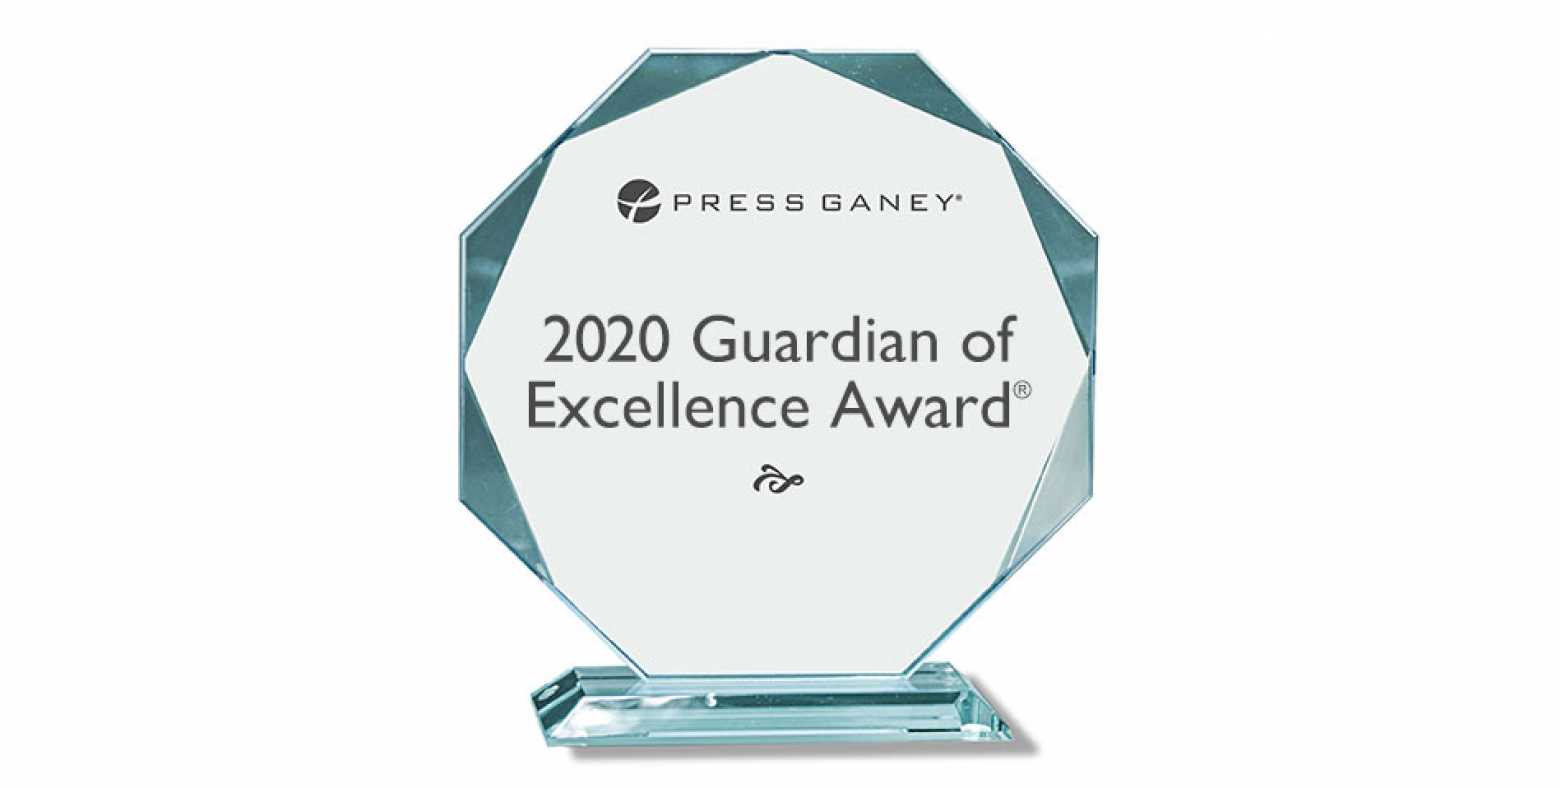 202 Guardian of Excellence Award